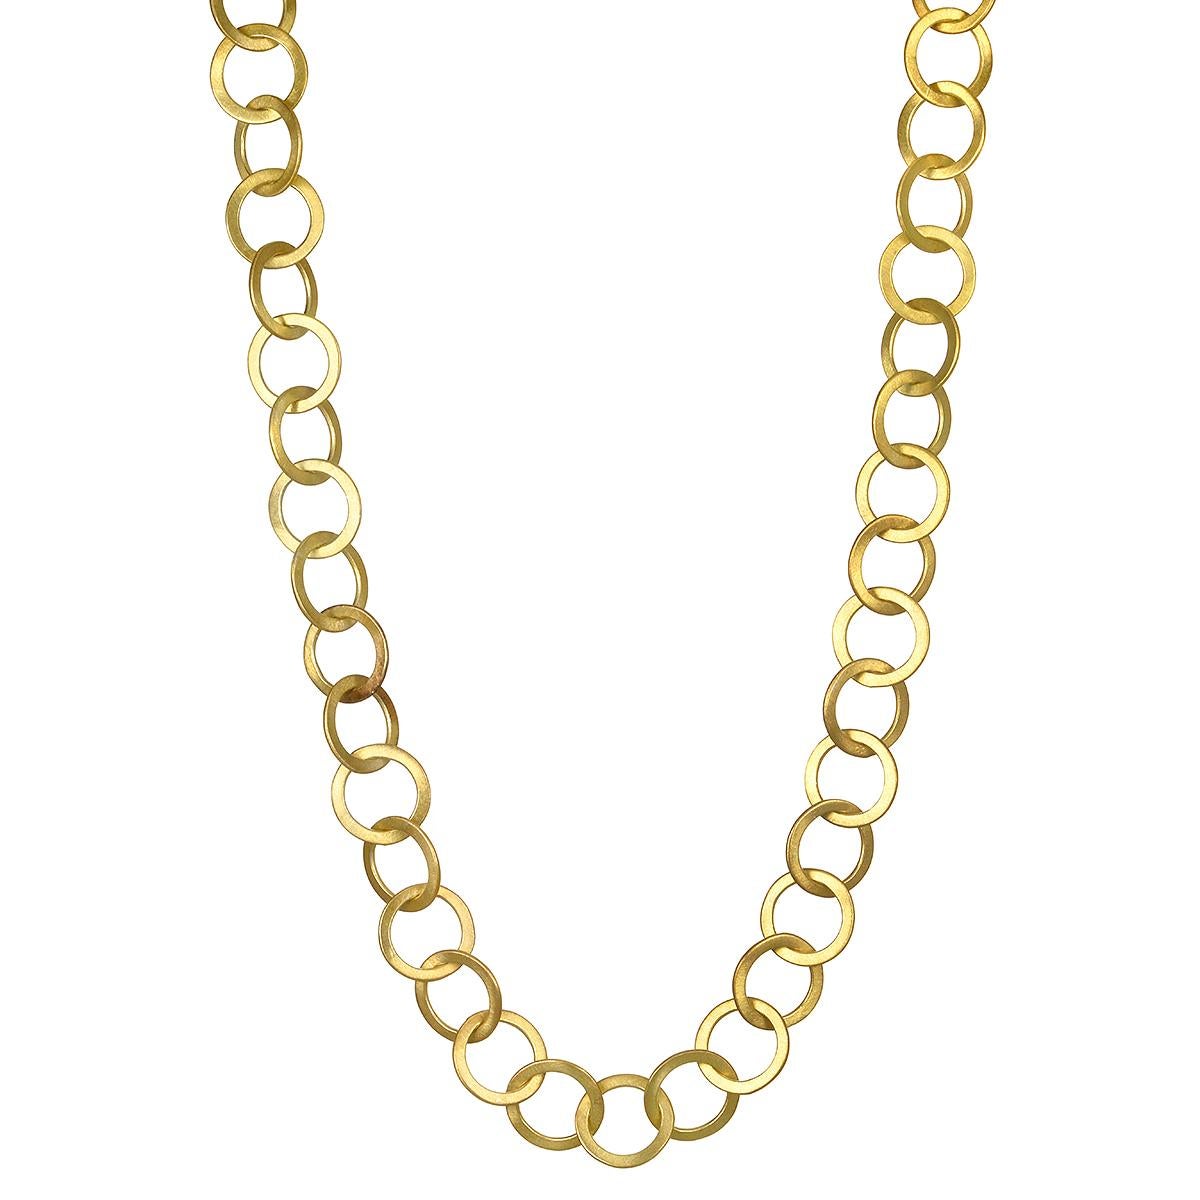 Experience luxury every day in Faye Kim's 18 Karat Gold Handmade Round Planished Lighter Weight Link Chain. The perfect go-to chain has round planished links all of which give it gorgeous texture and a bold look for the modern woman. This chain is